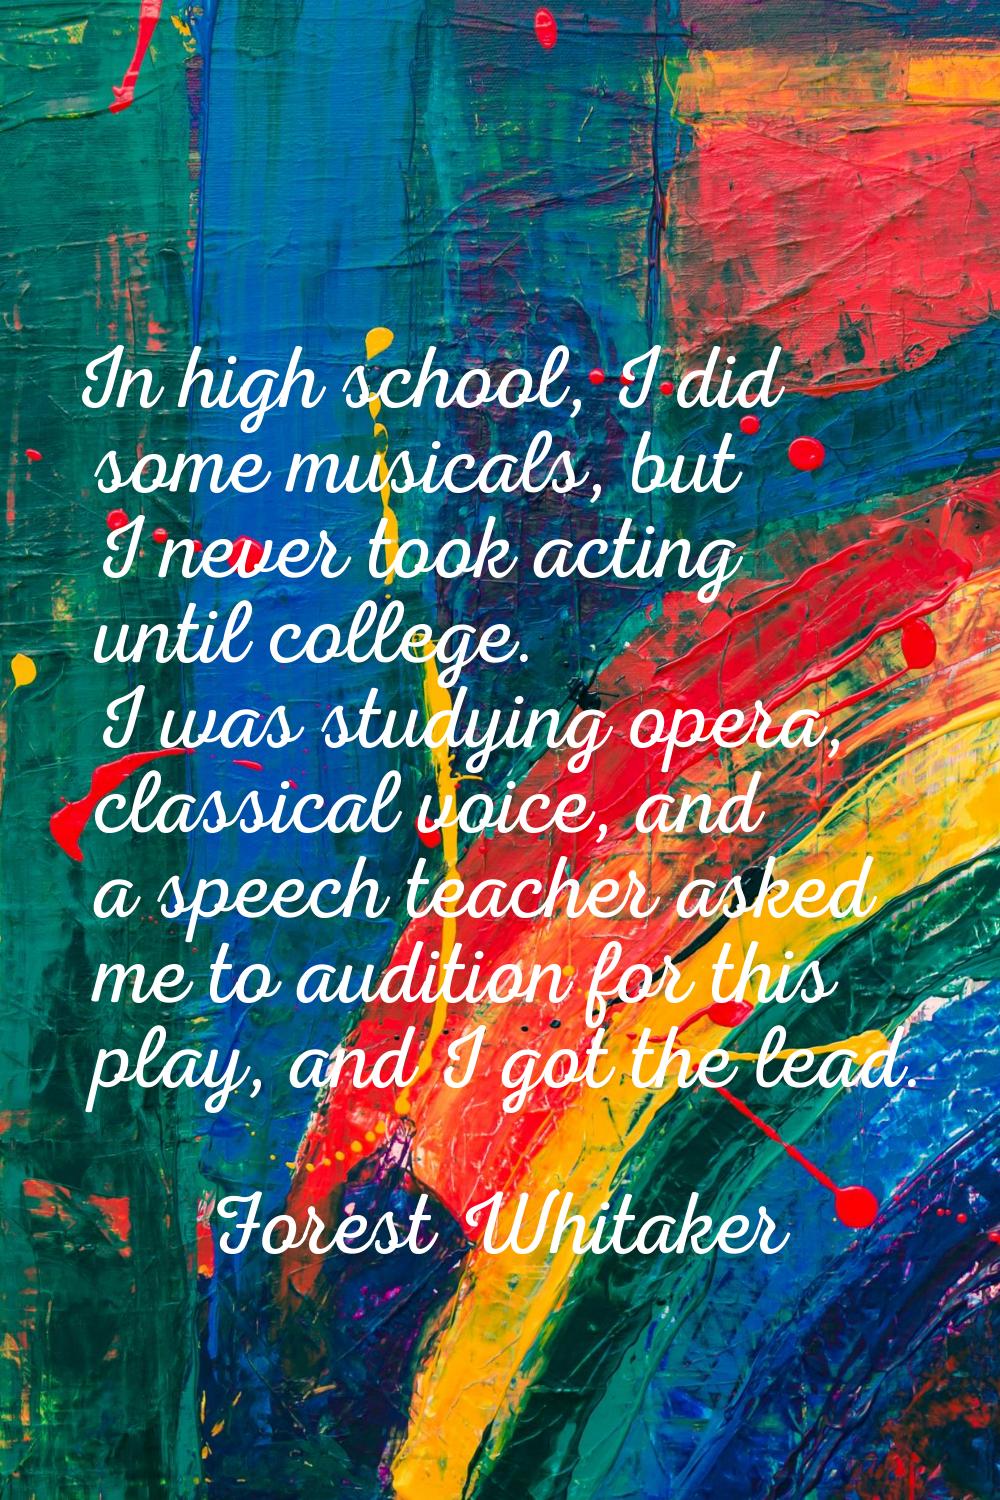 In high school, I did some musicals, but I never took acting until college. I was studying opera, c